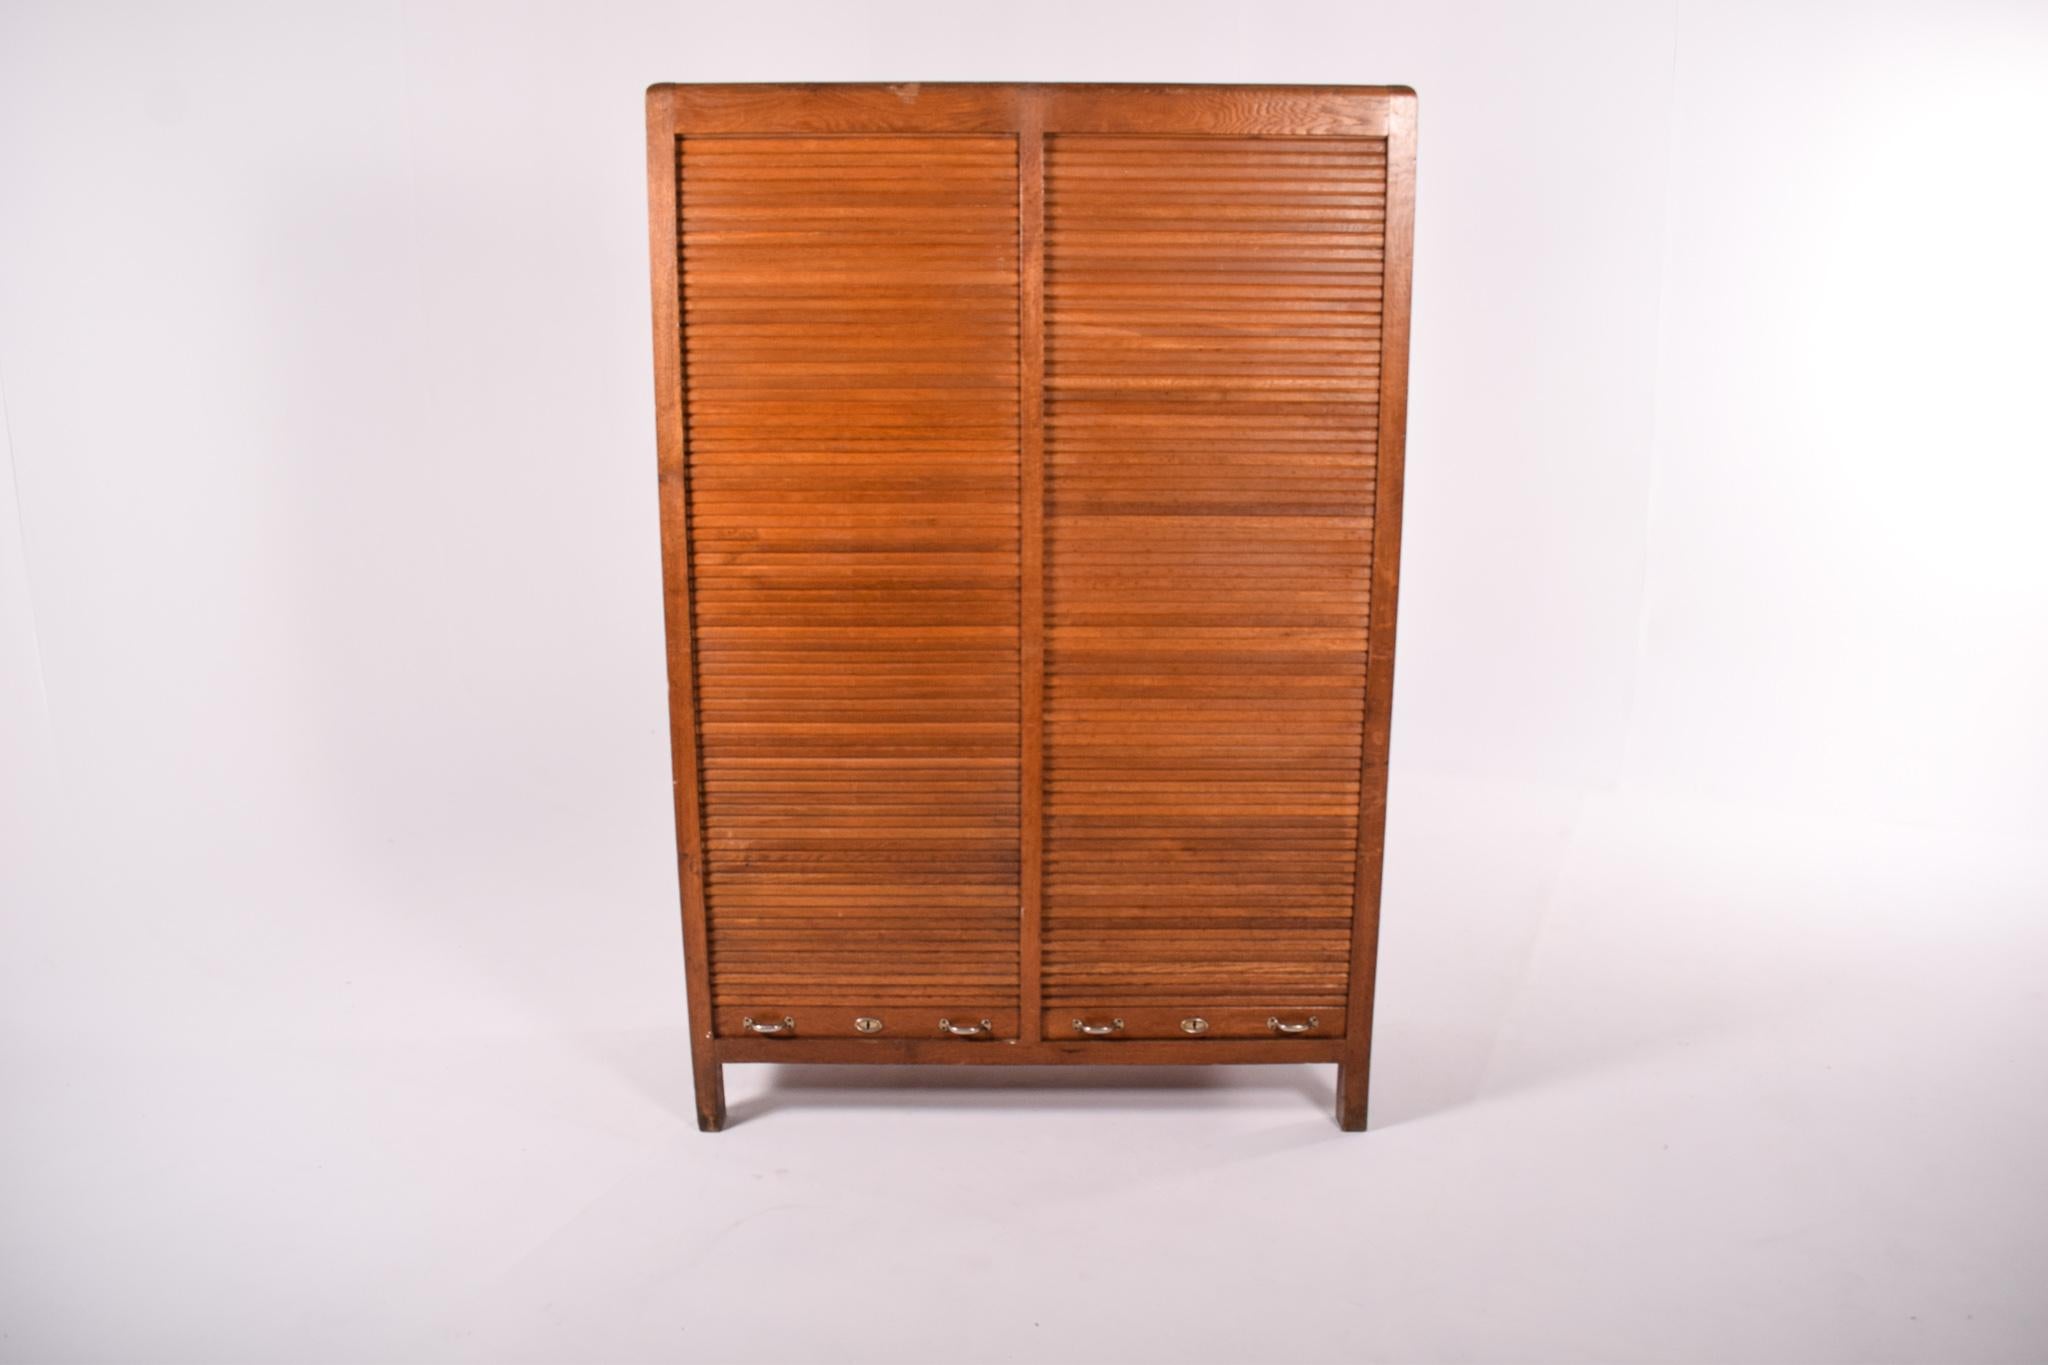 This vintage oak cabinet from the 1950s is a piece of classic mid-century furniture with a distinct Portuguese flair, crafted by the esteemed company Olaio. The cabinet's design is both elegant and practical, featuring a sturdy and warm oak